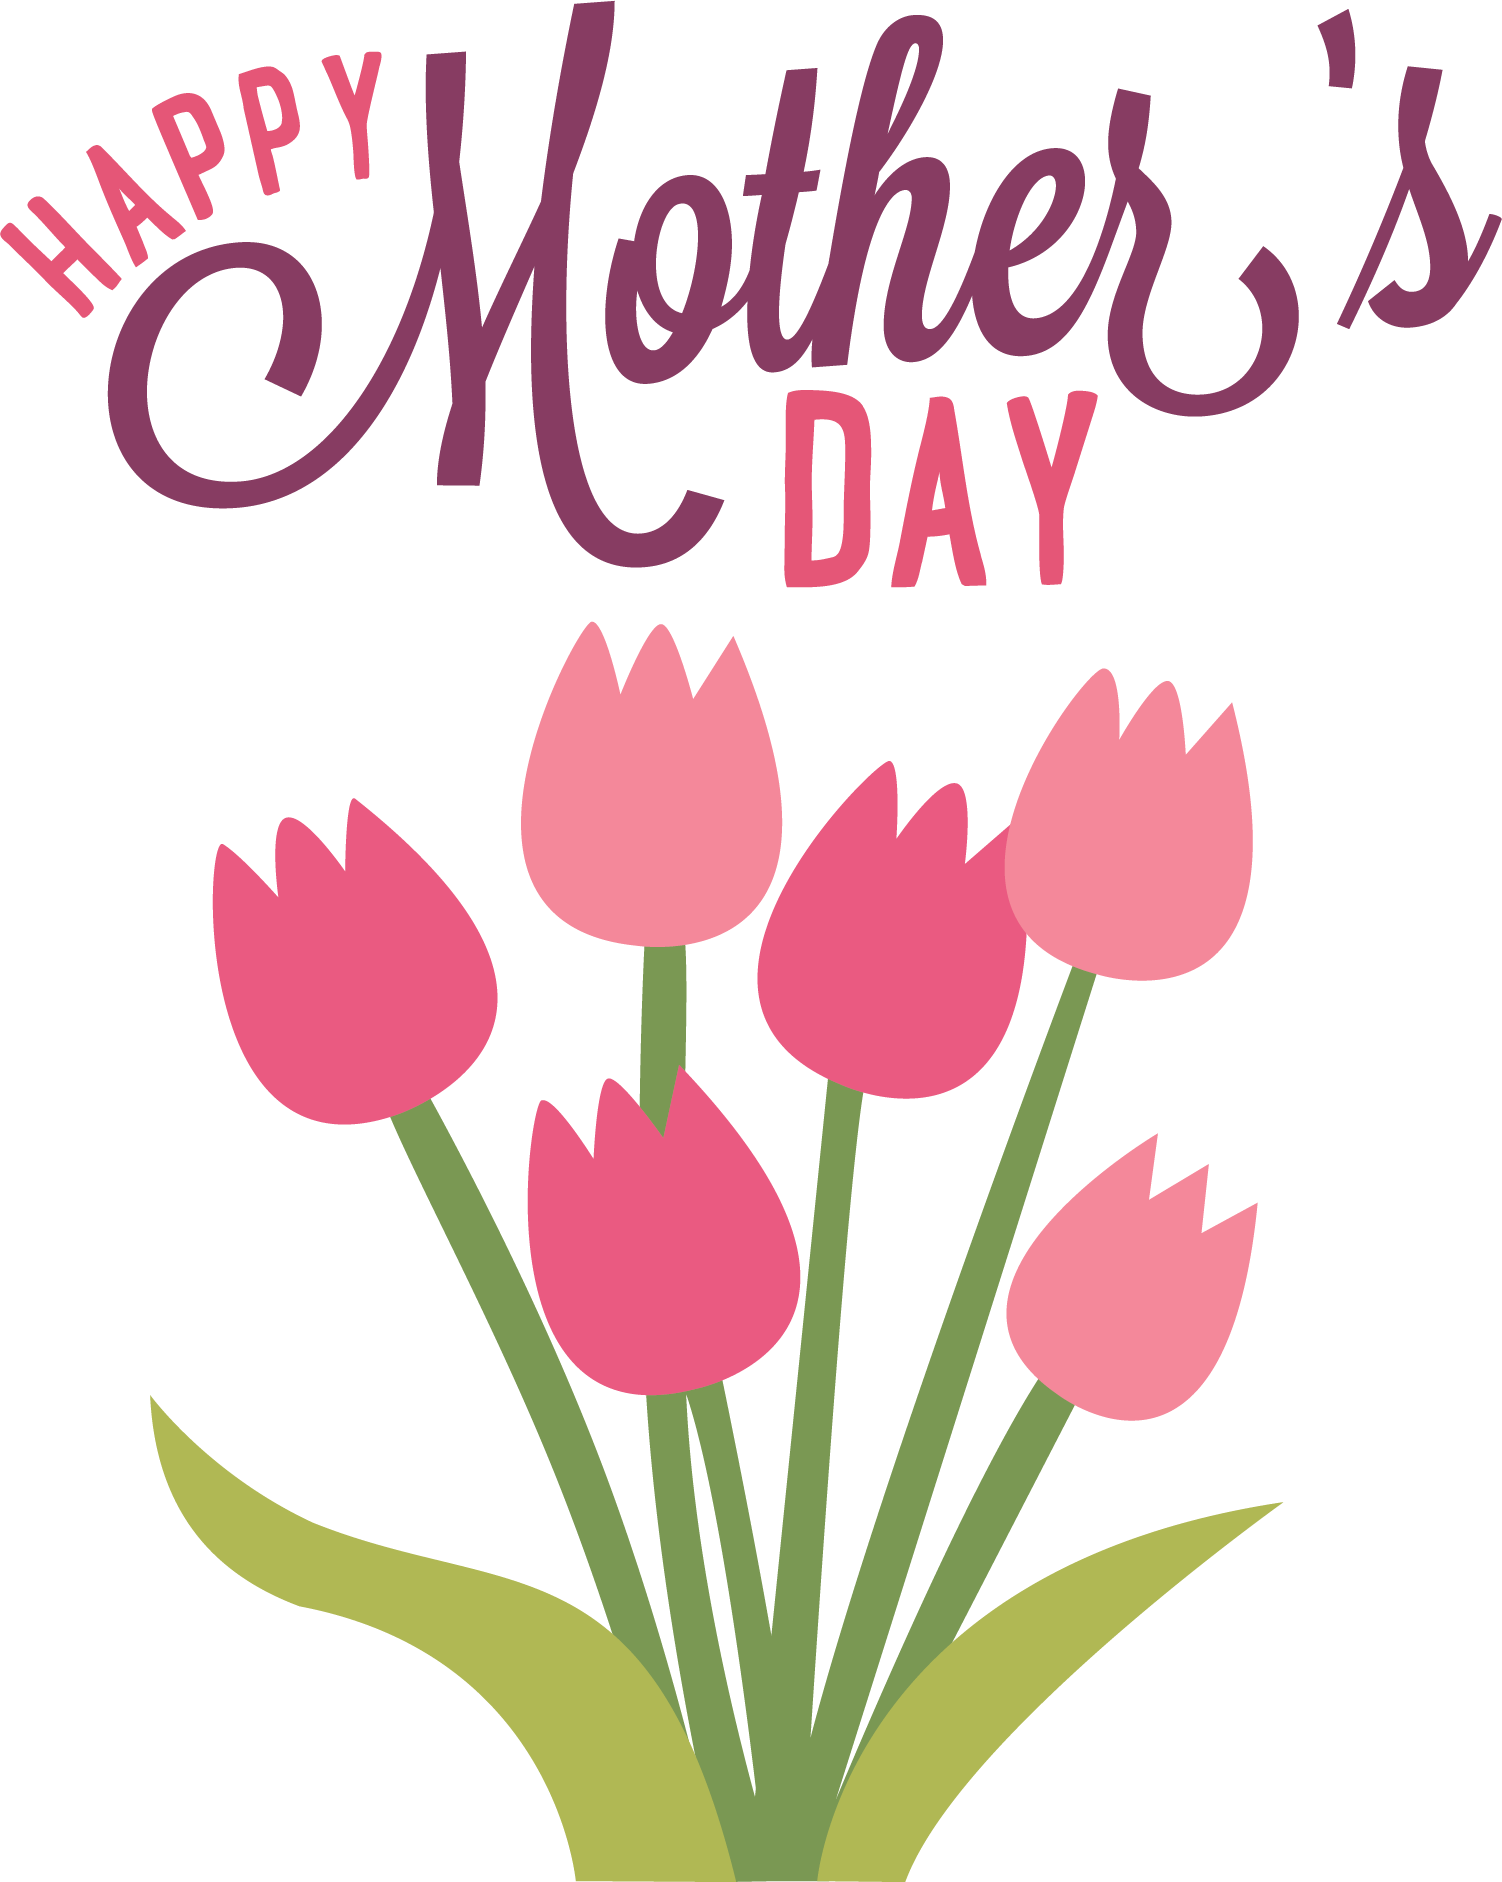 Mothers Day 2015 Pictures, Pictures, Images